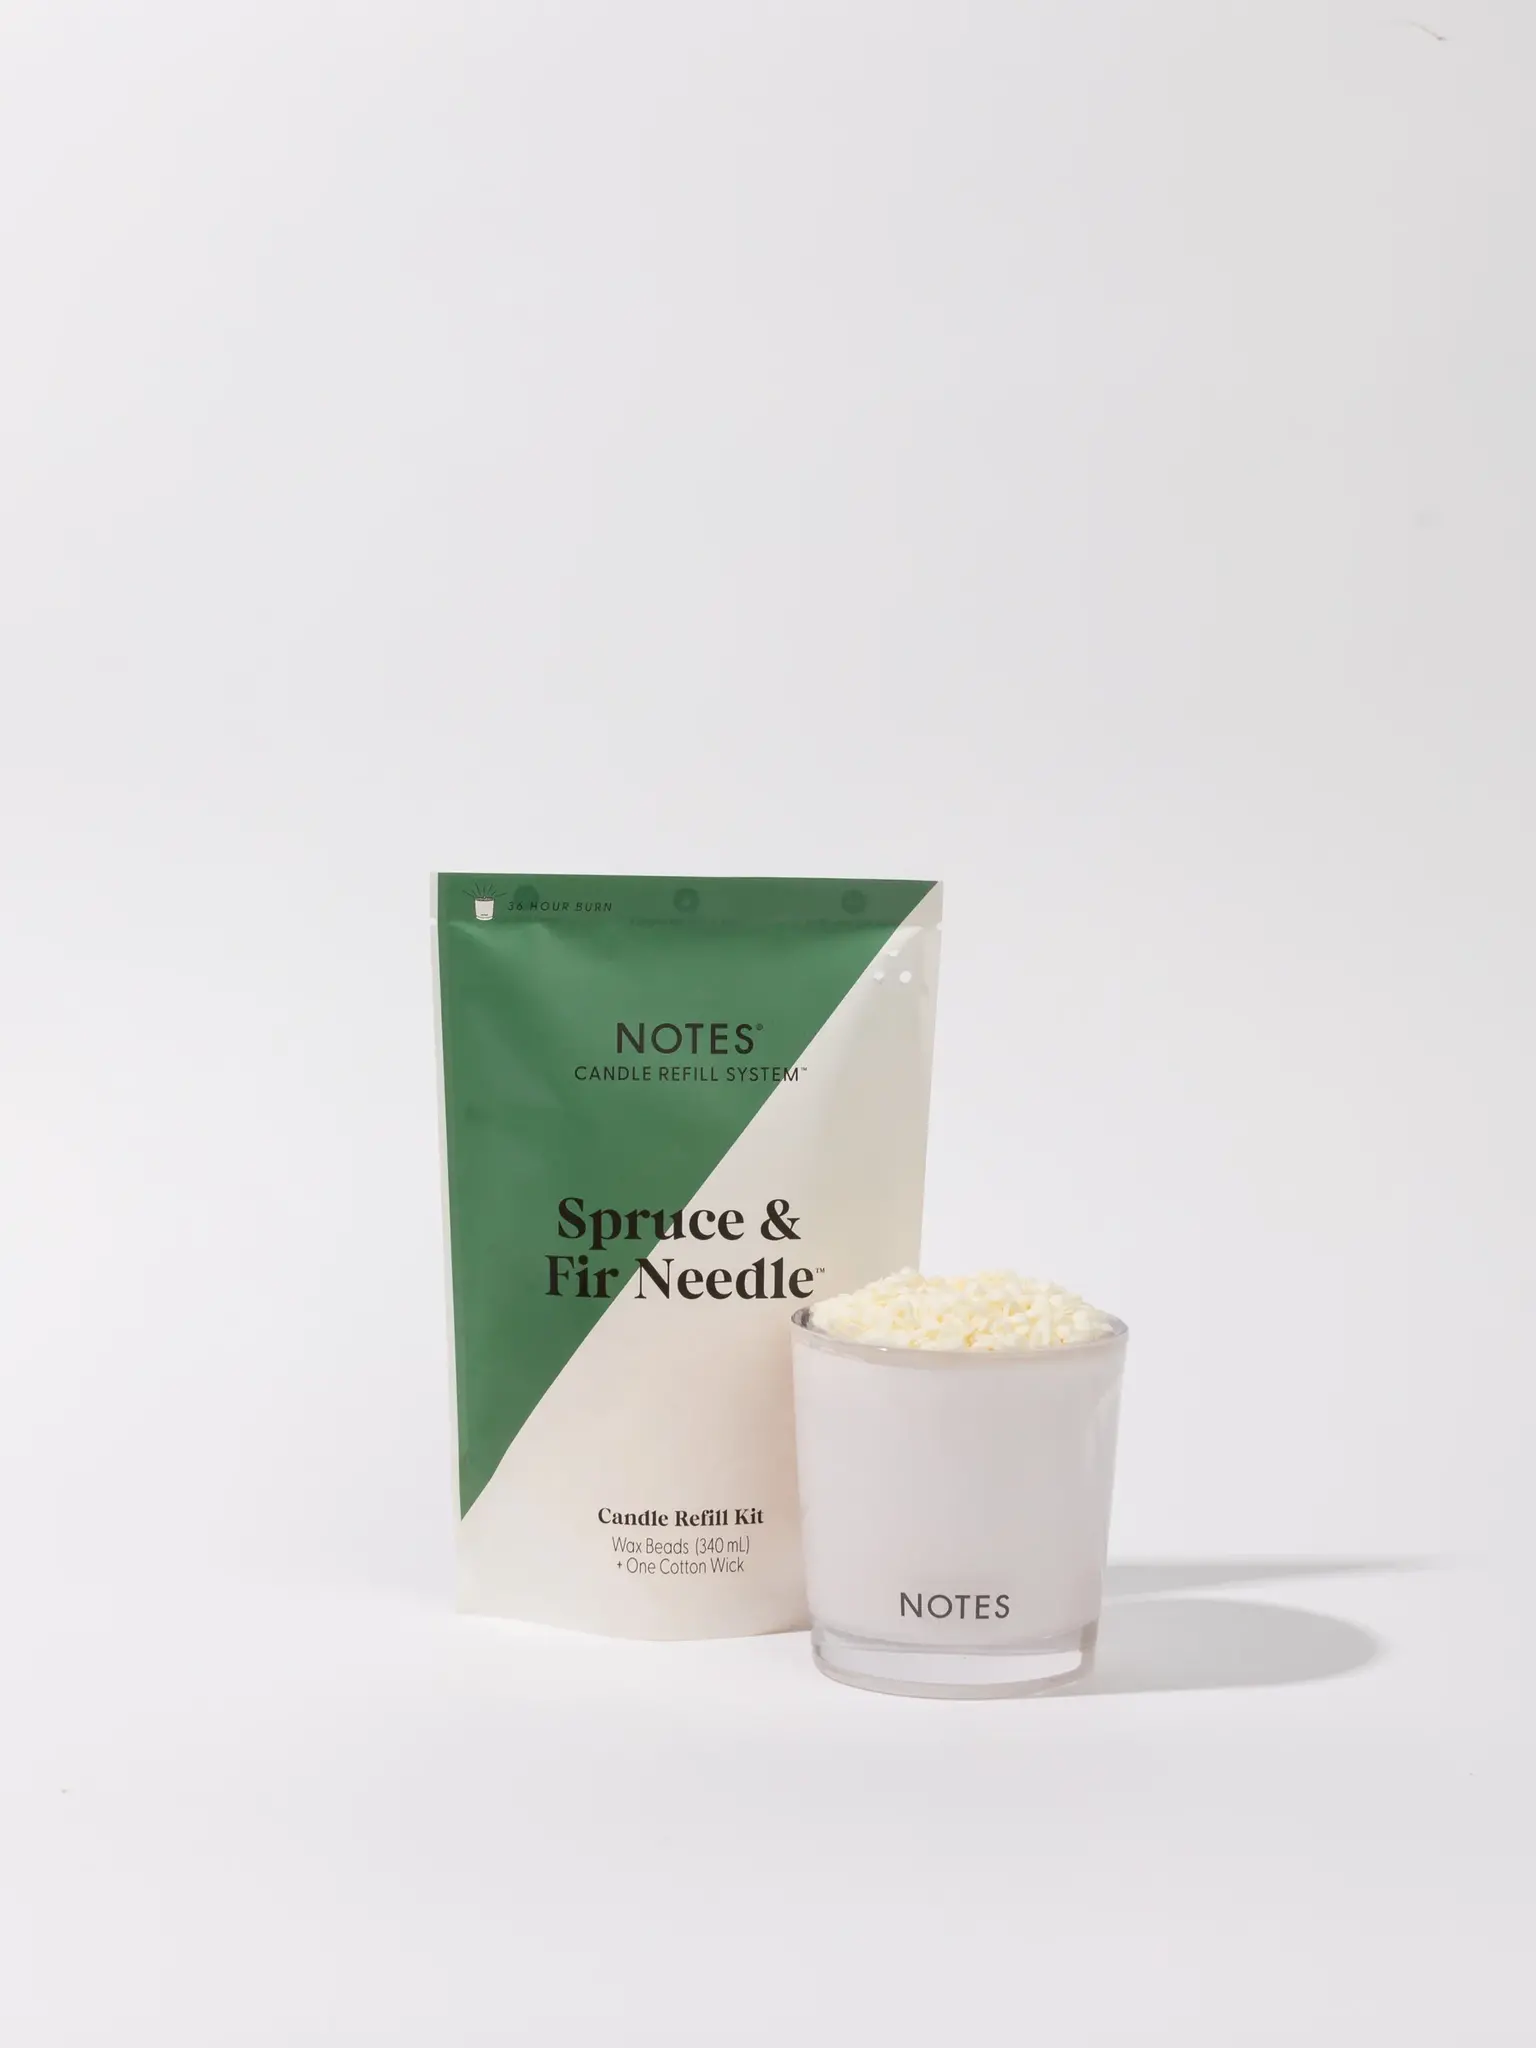 NOTES Sustainable Candle Refill Kit Spruce & Fir Needle